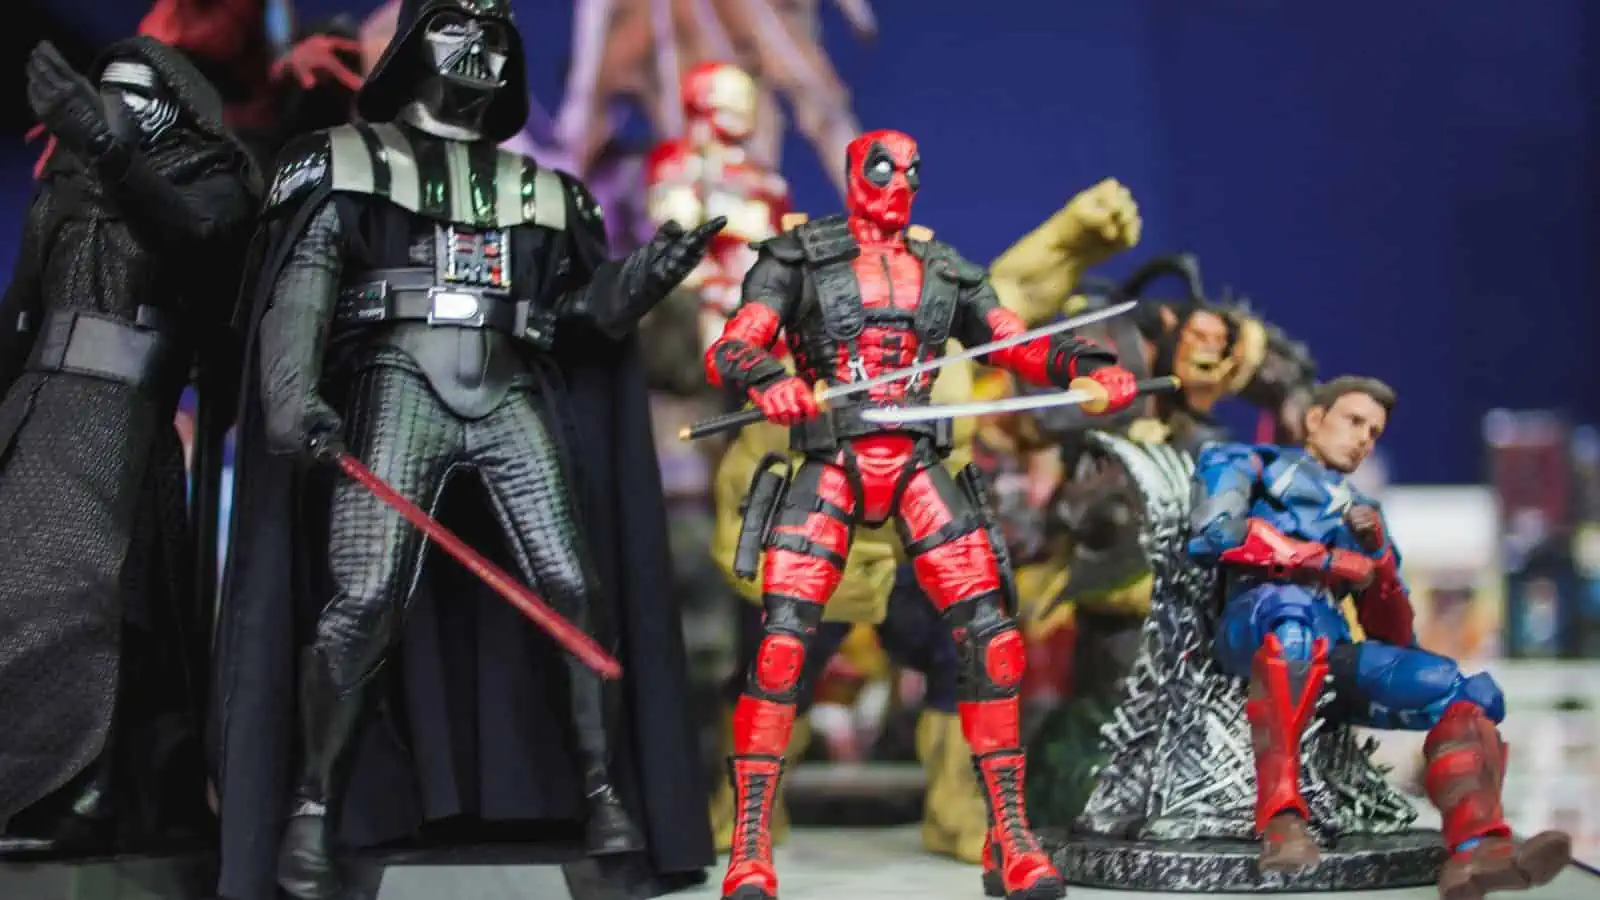 action figures of darth vader and spiderman